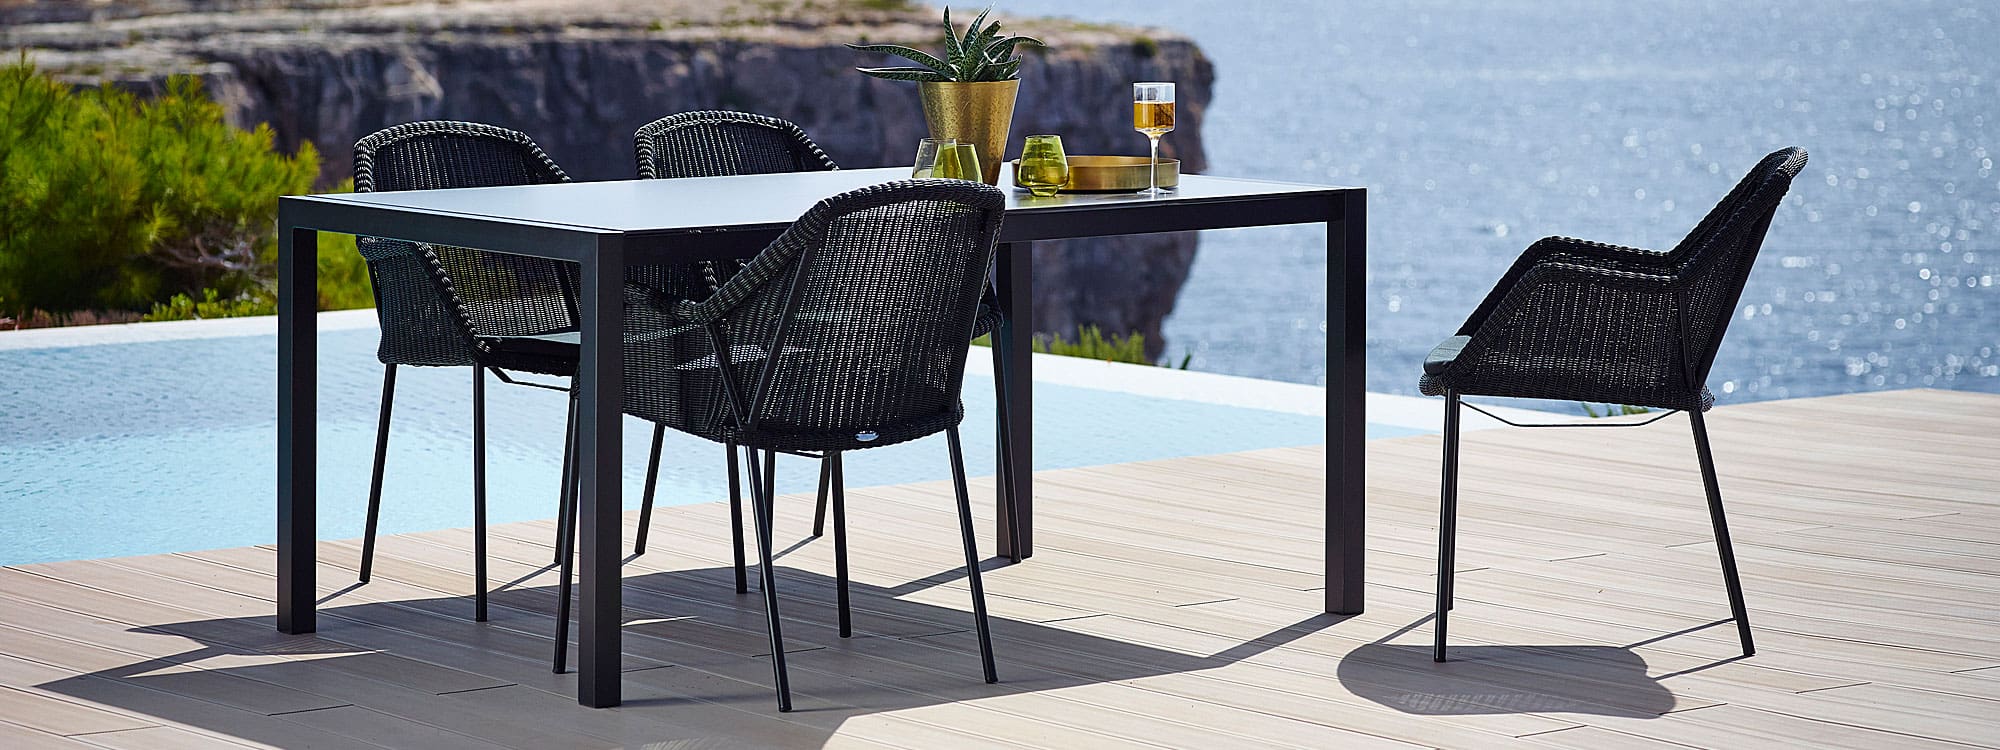 Image of black Cane-line Breeze chairs around a black dining table on cliff-top terrace